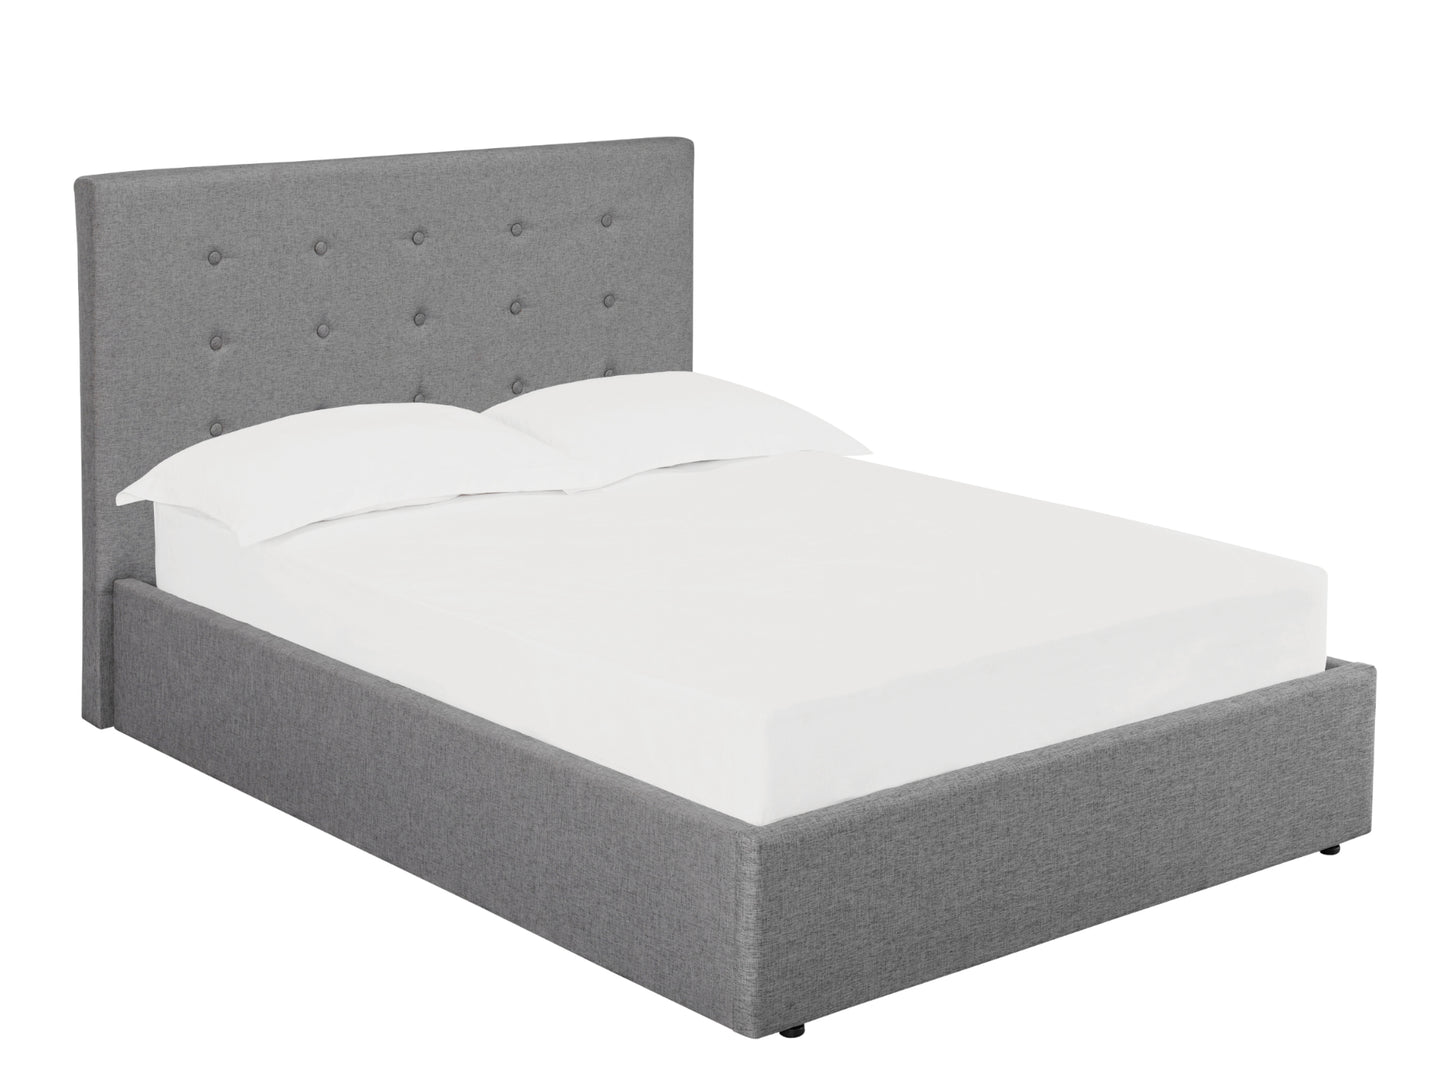 Lucca Ottoman Storage Bed Frame in Soft Grey